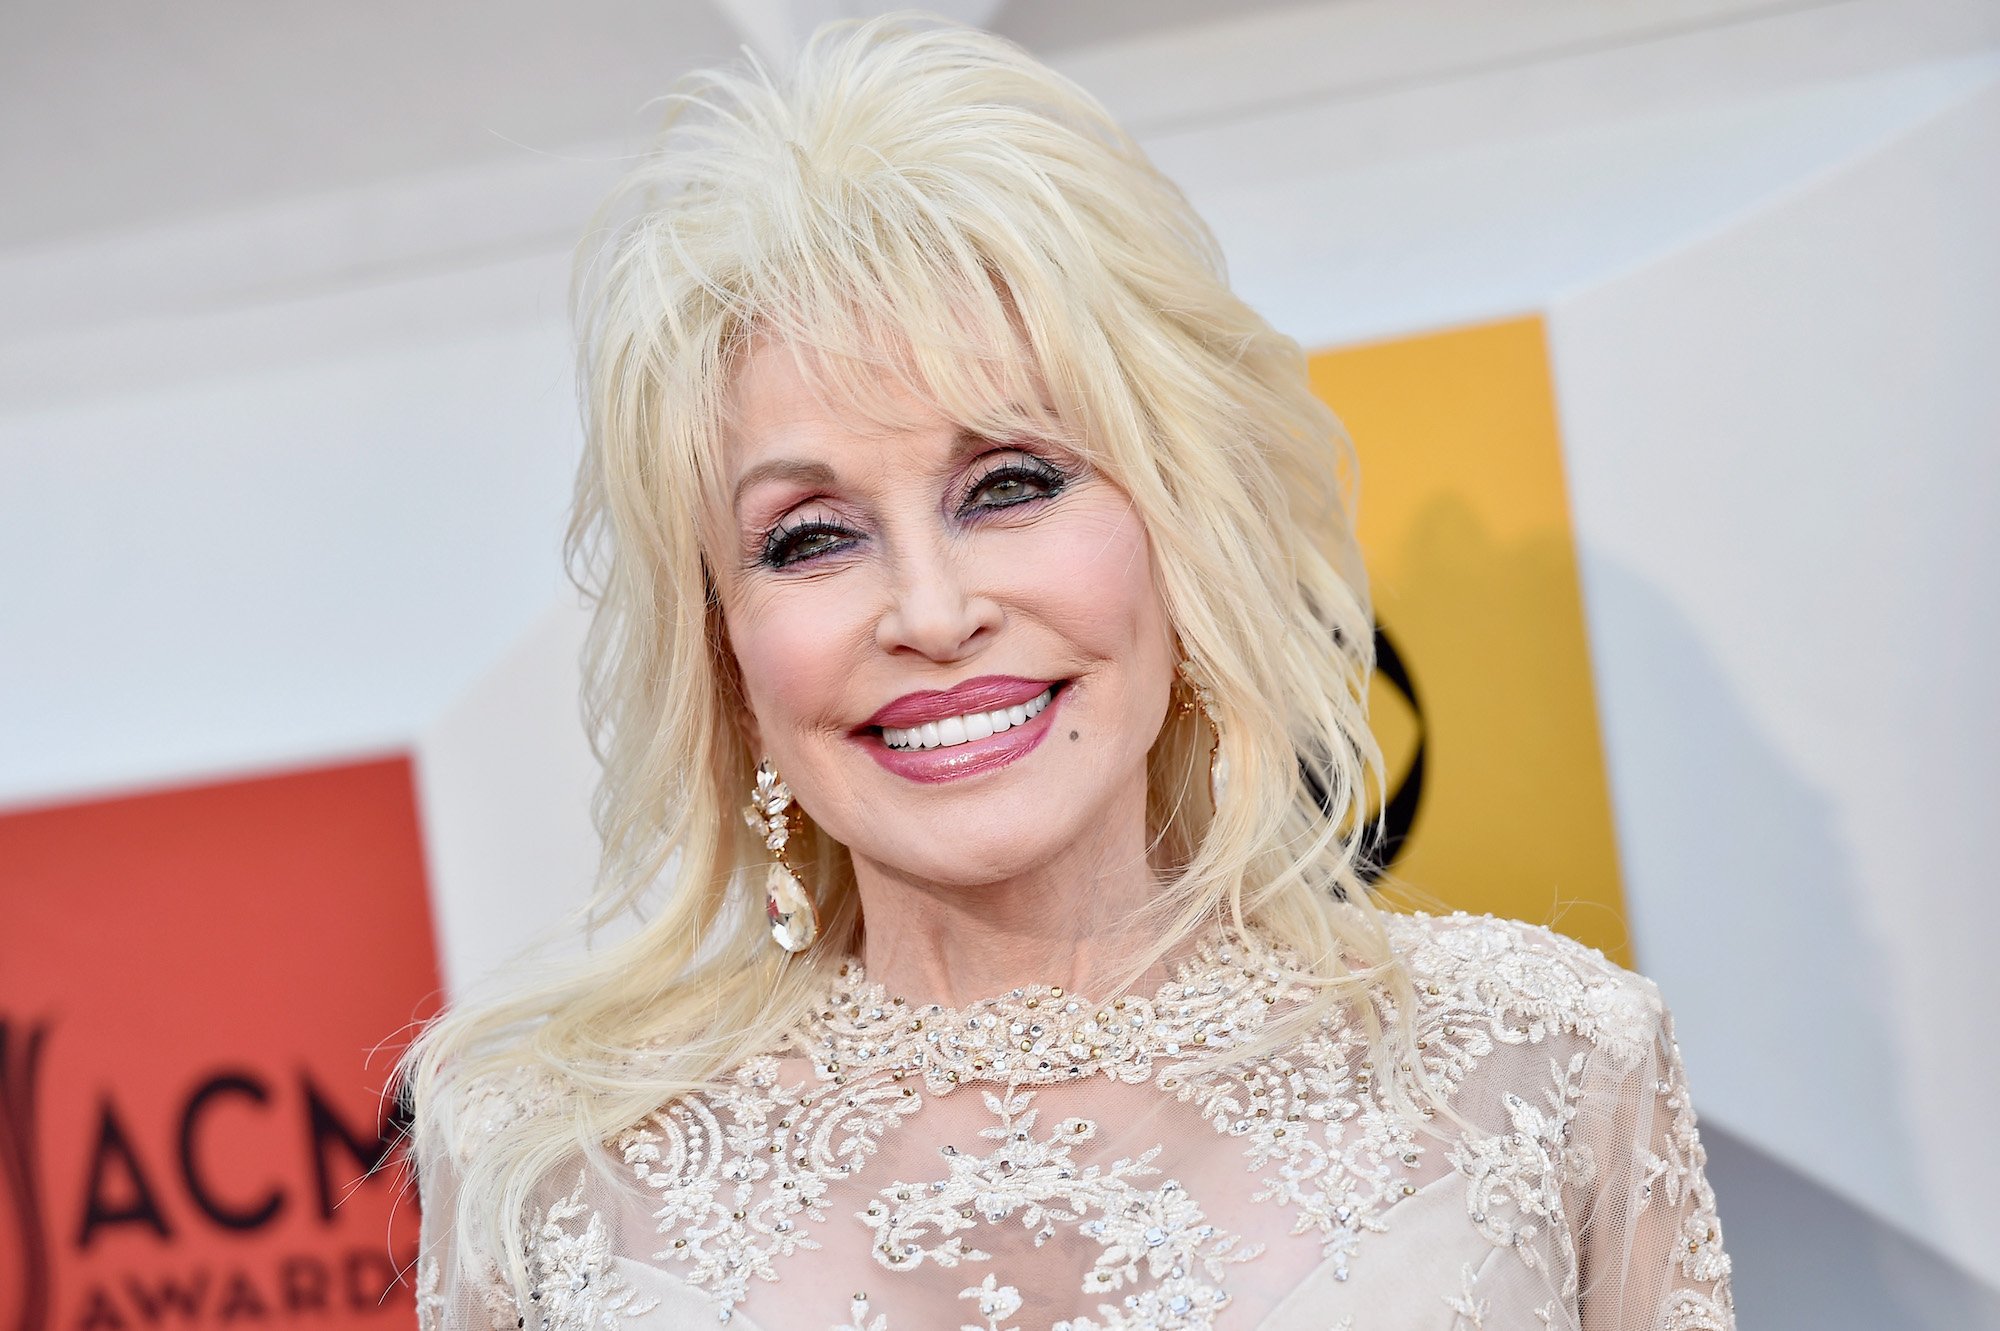 Dolly Parton attending the 51st Academy Of Country Music Awards in 2016